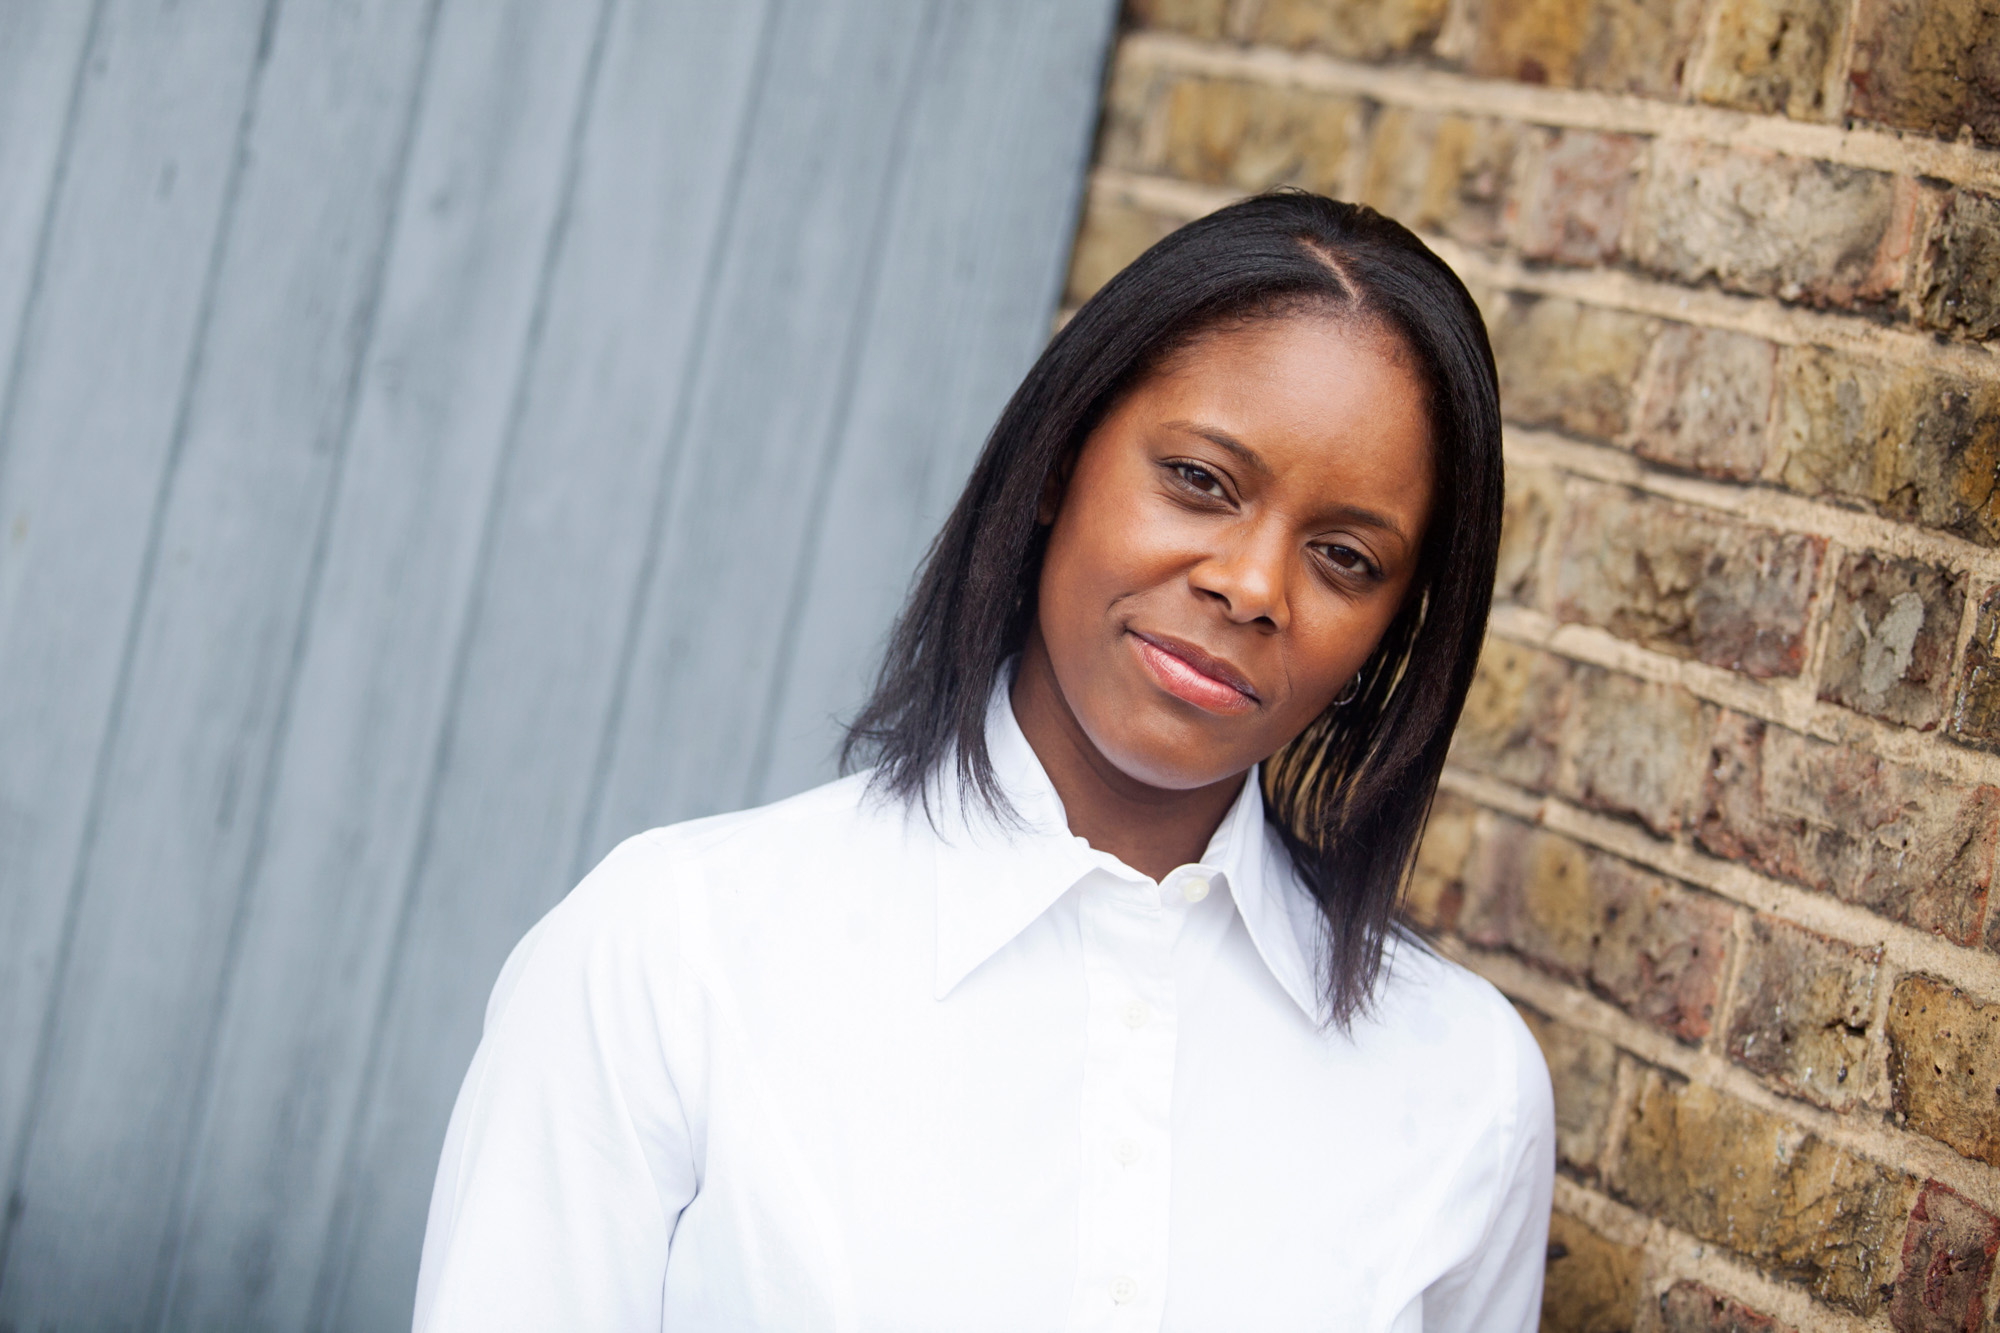 London headshot photography, a business woman standing in front of a brick wall & blue wooden door.